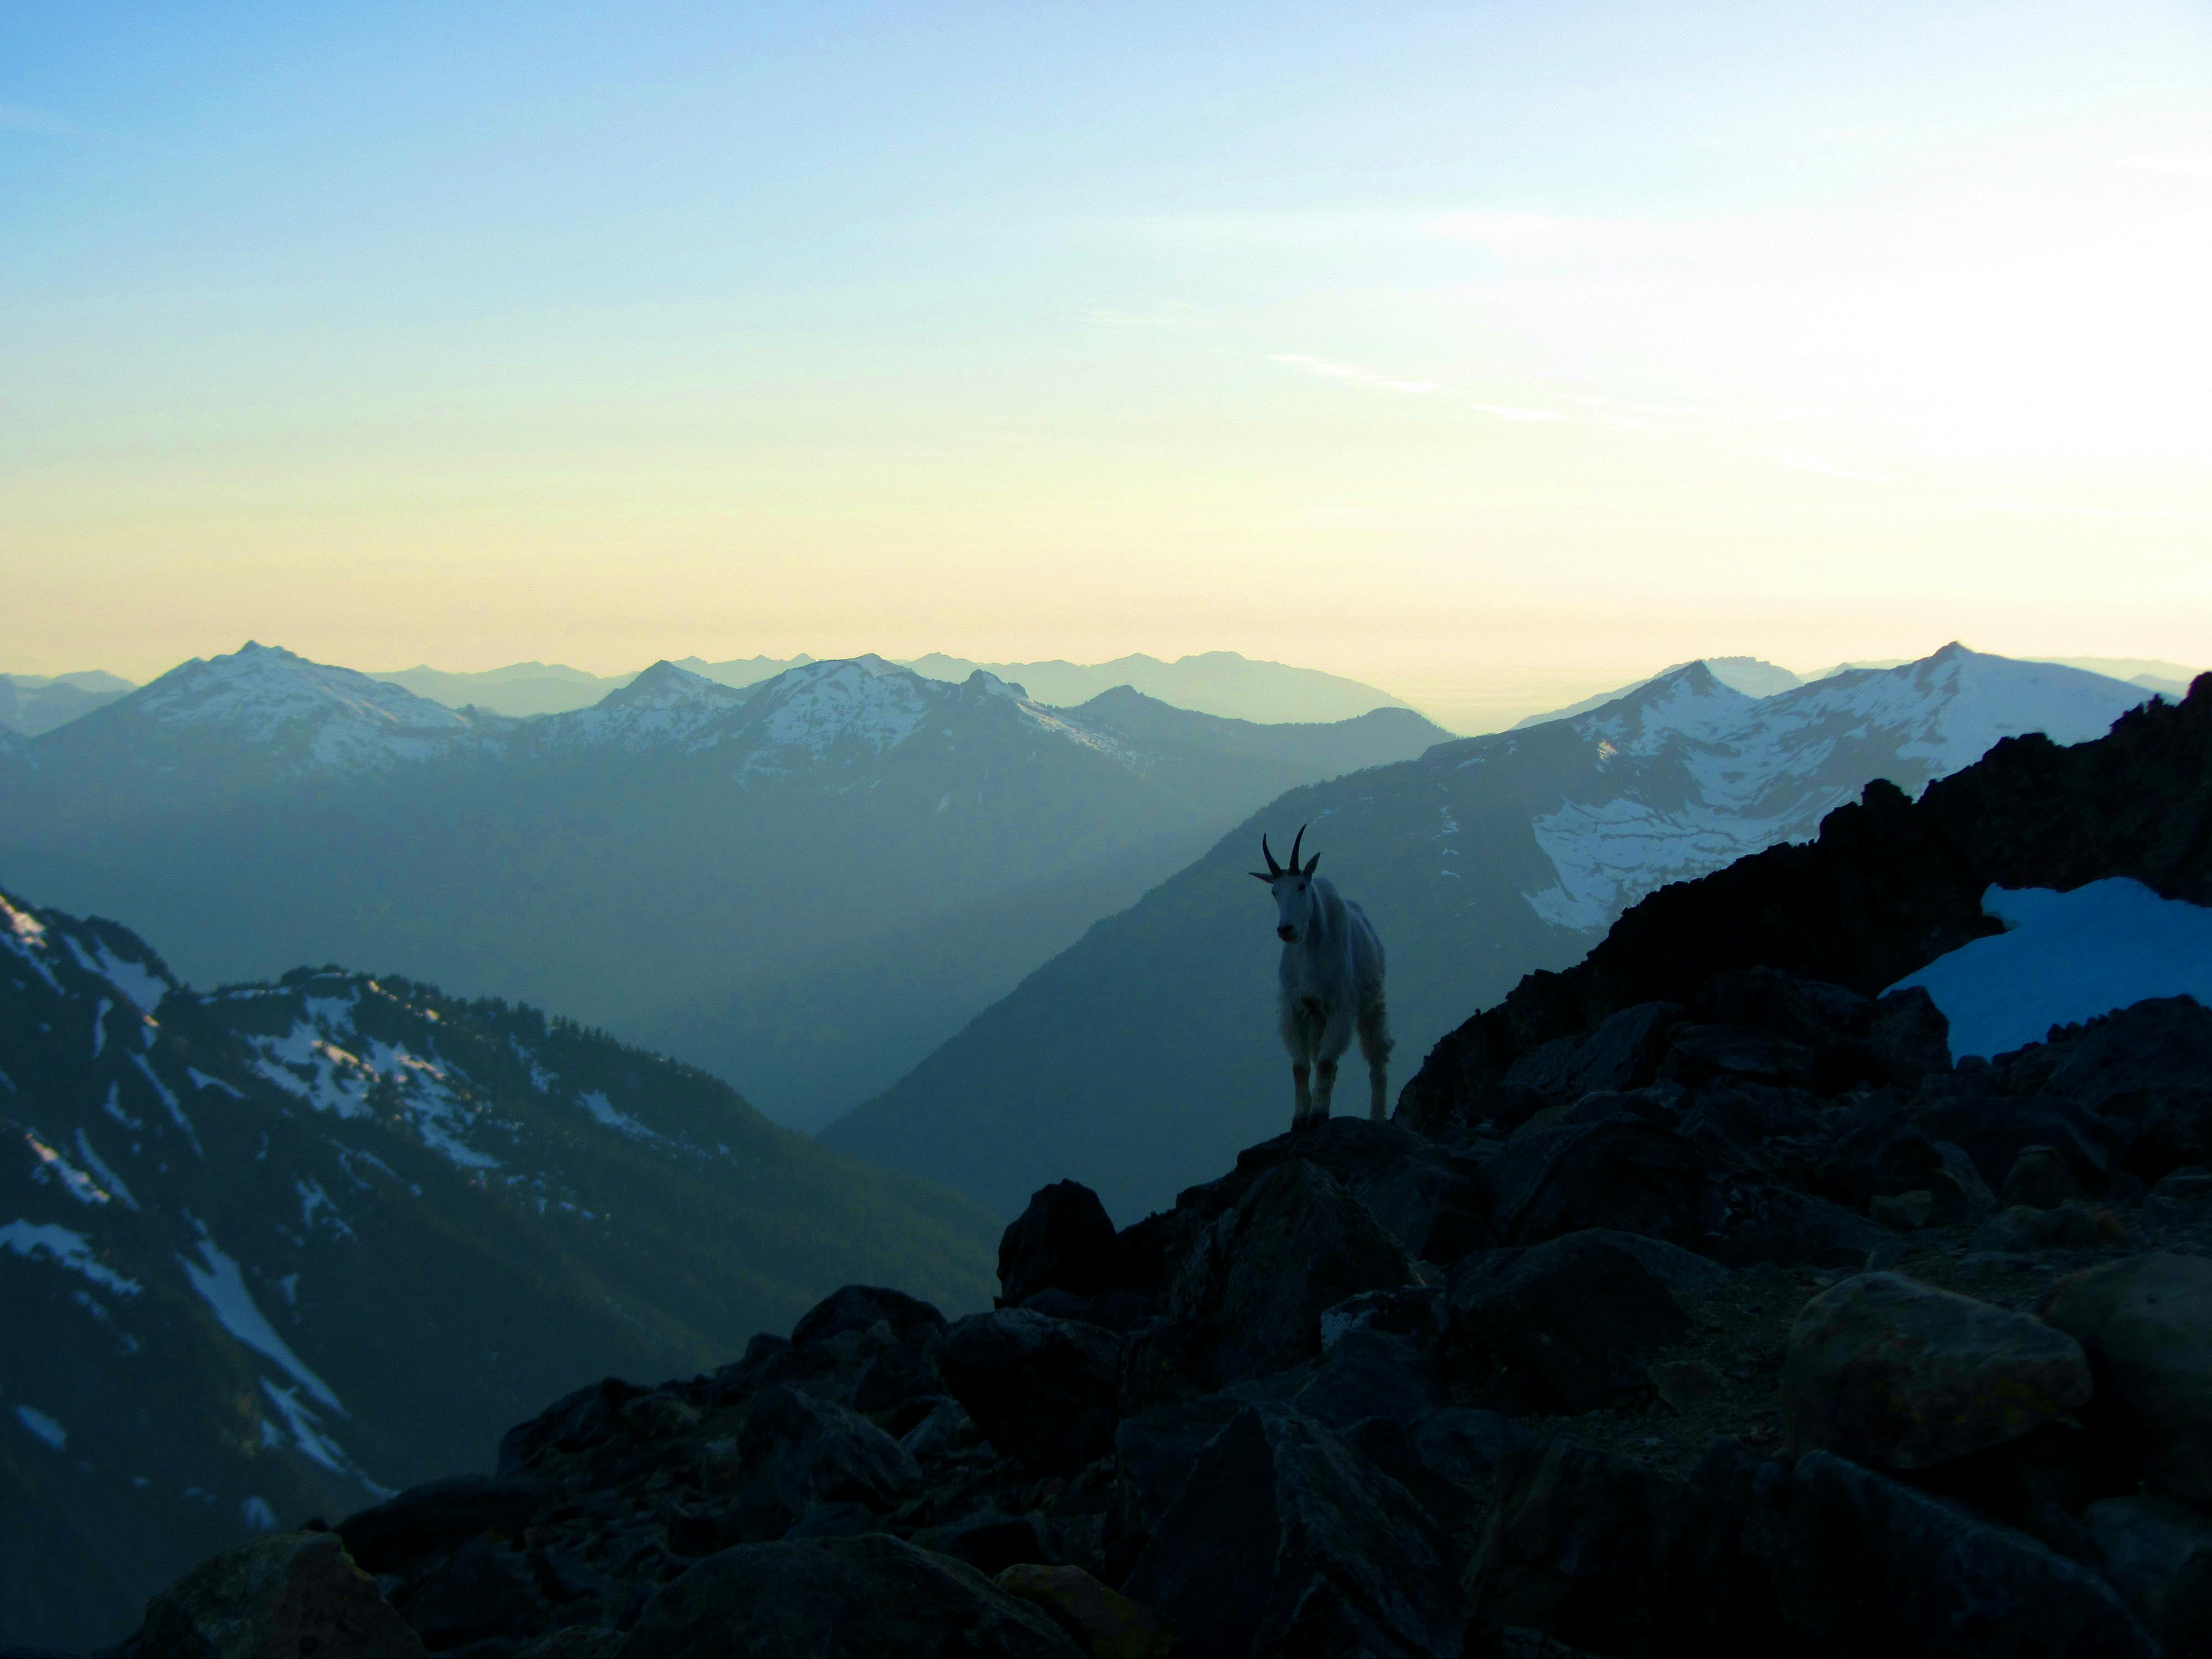 Mountain goat at dusk hour in a snowy mountain range.